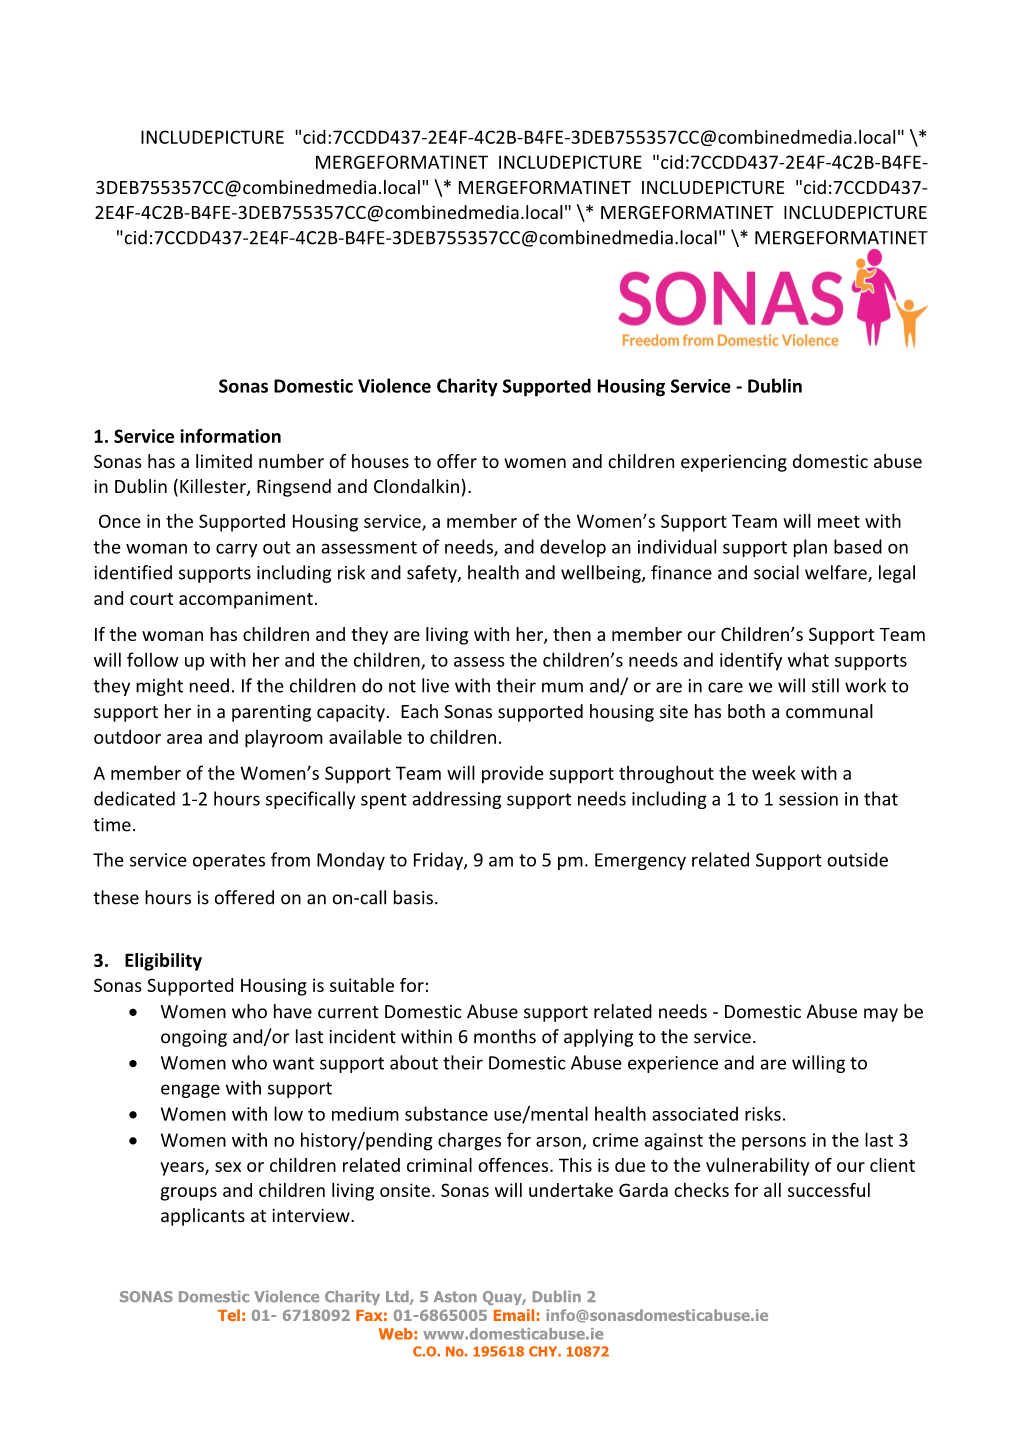 Sonas Domestic Violence Charitysupported Housing Service - Dublin